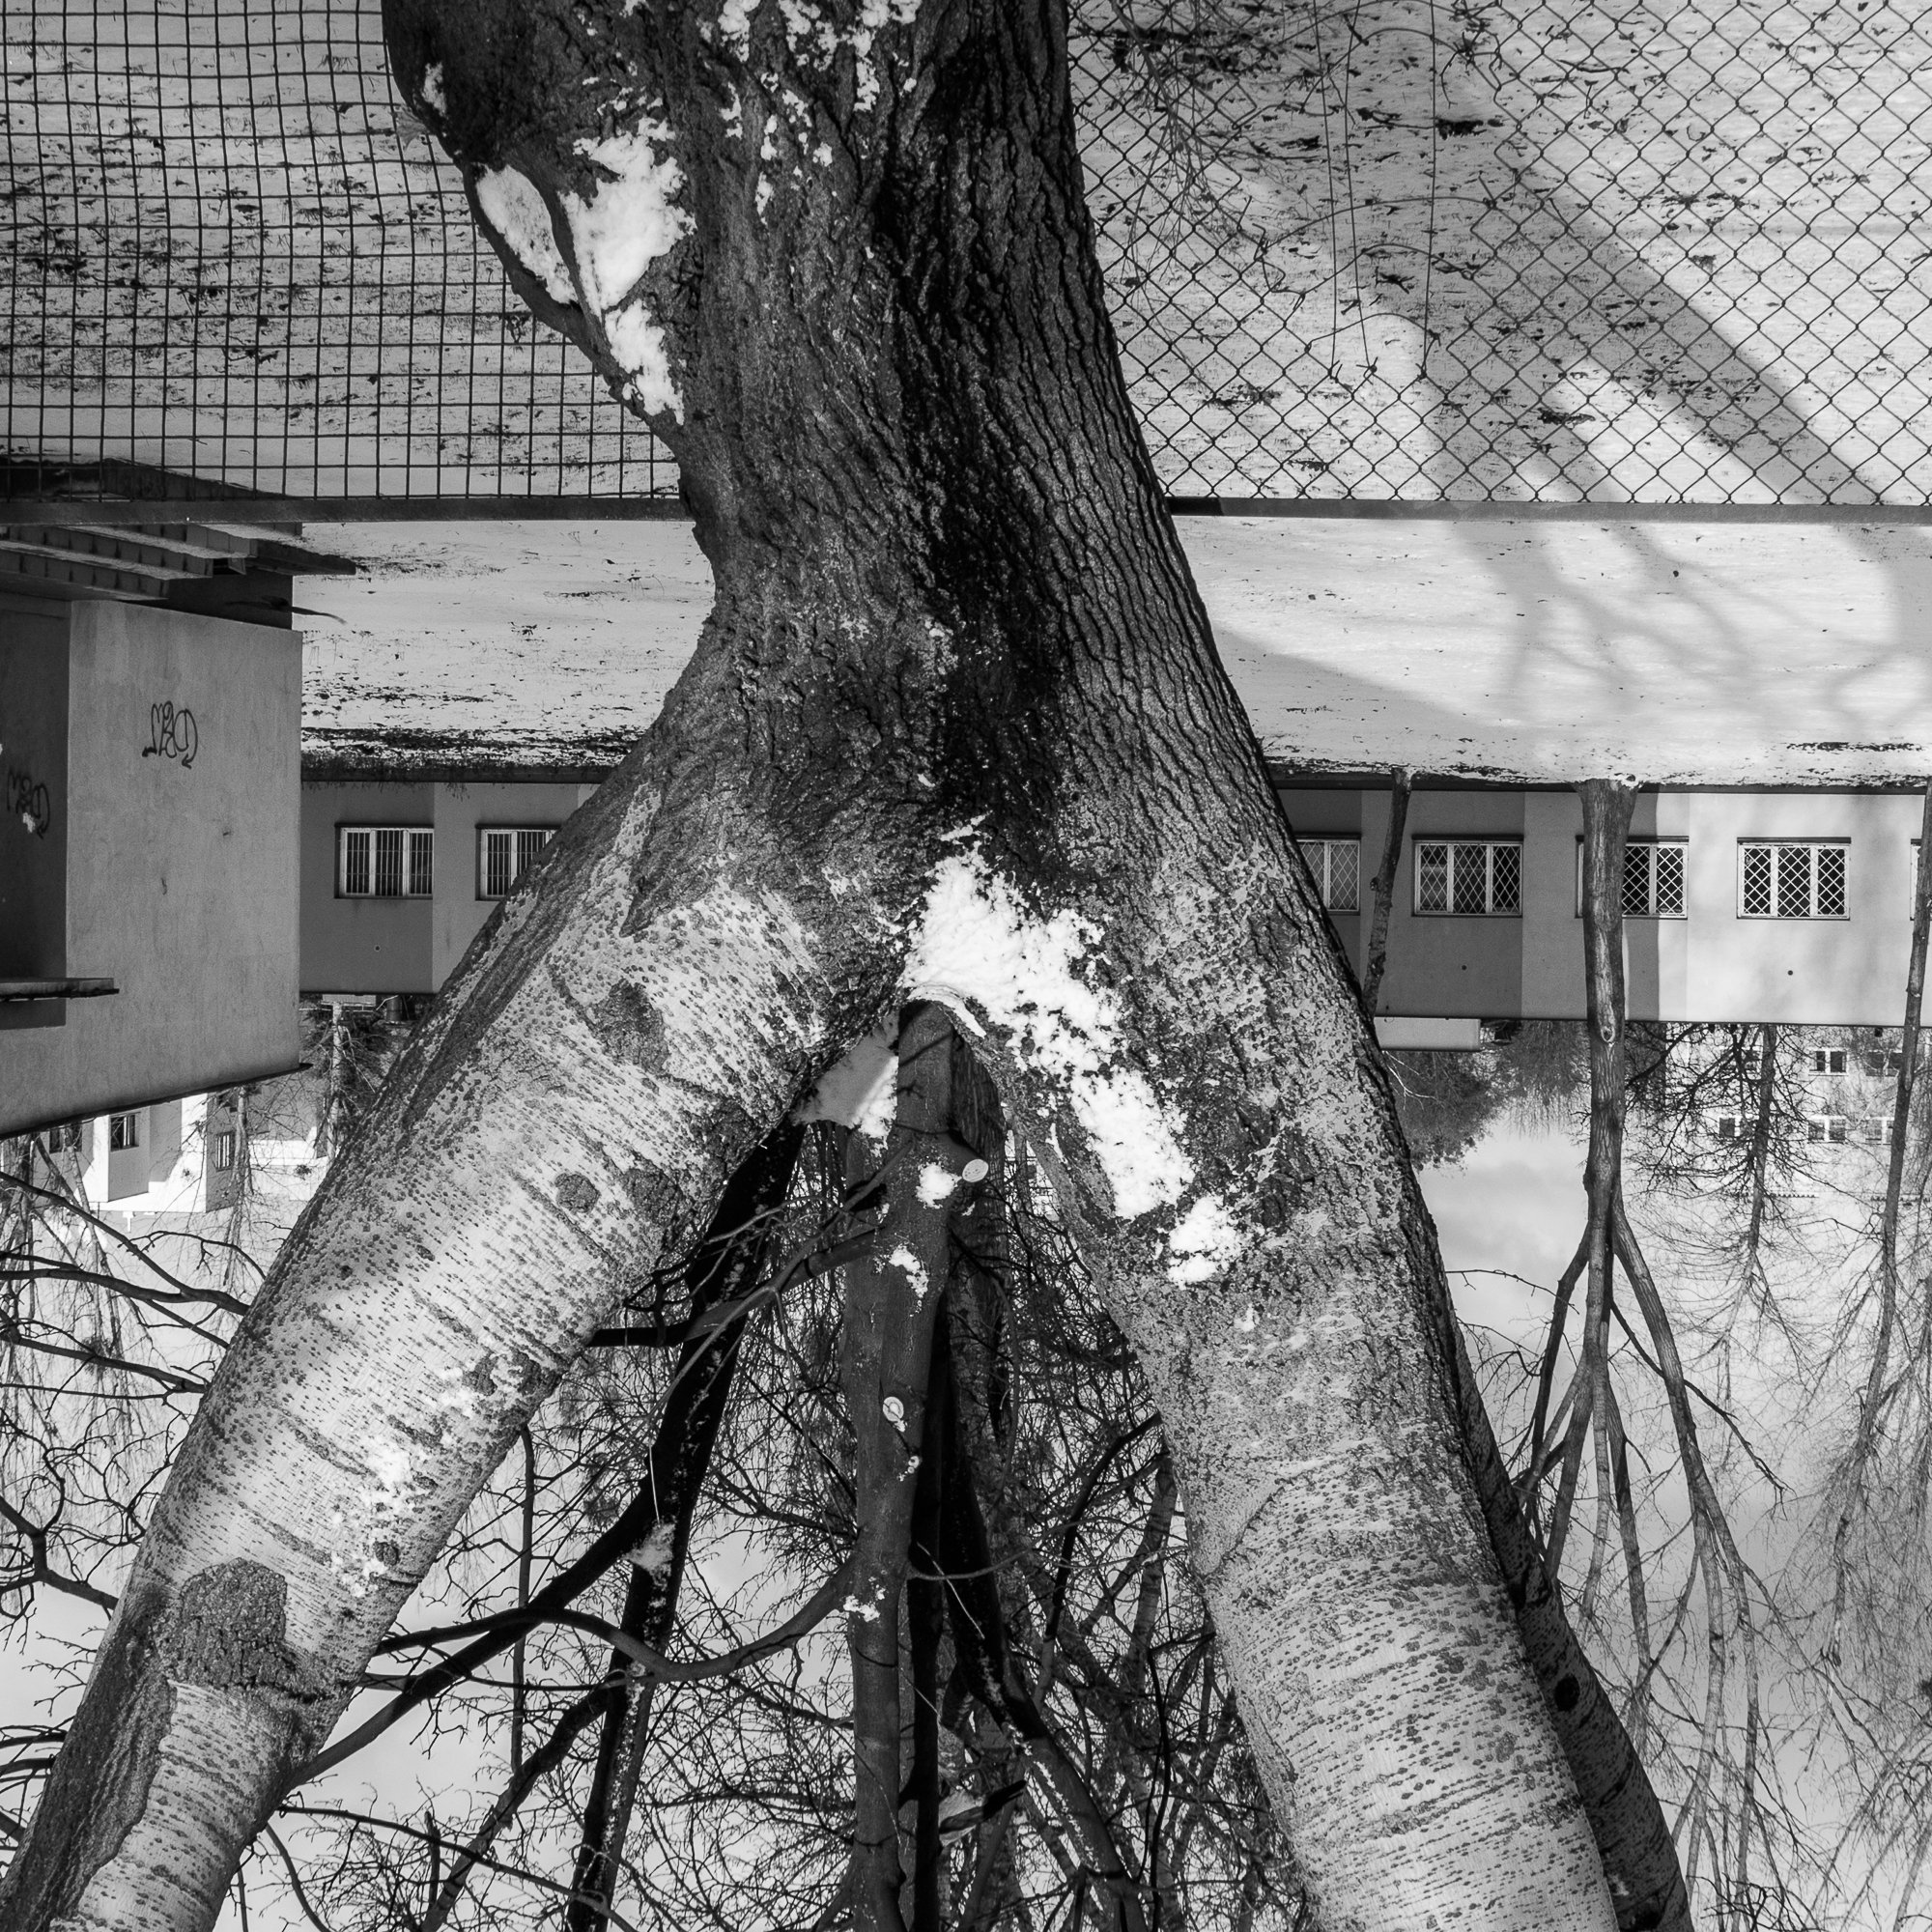 Adam Mazek Photography Warsaw (Warszawa) 2019. Post: "What do people see in my pictures?." Abstraction. Tree with a snow-penis, Square.